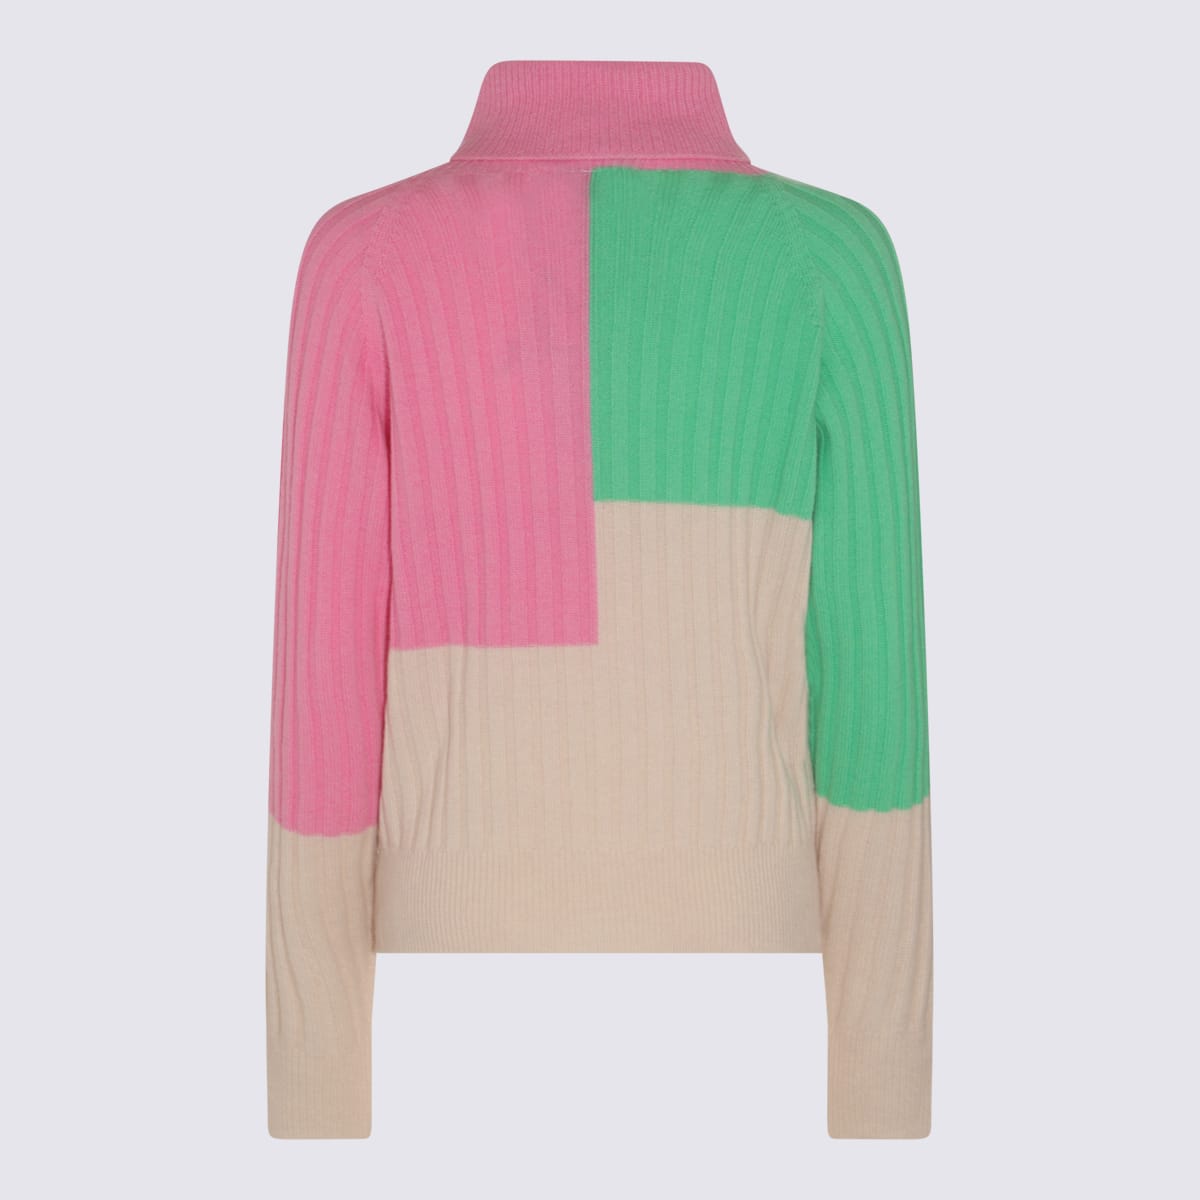 Beige, Green And Neon Pink Merino Wool And Cashmere Blend Rib Knit Sweater